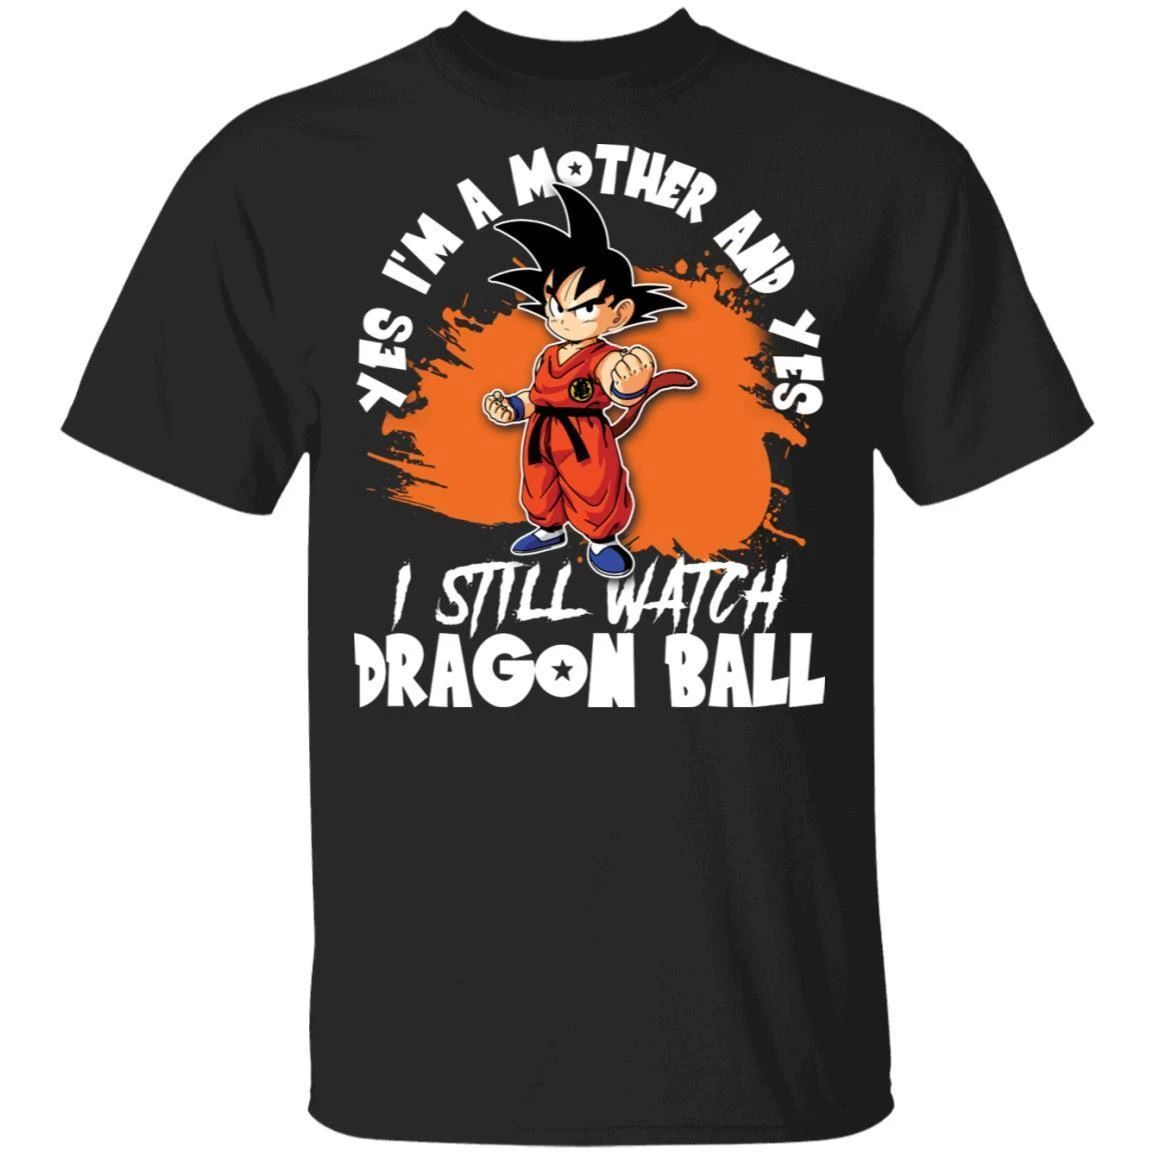 Yes I’m A Mother And Yes I Still Watch Dragon Ball Shirt Son Goku Tee